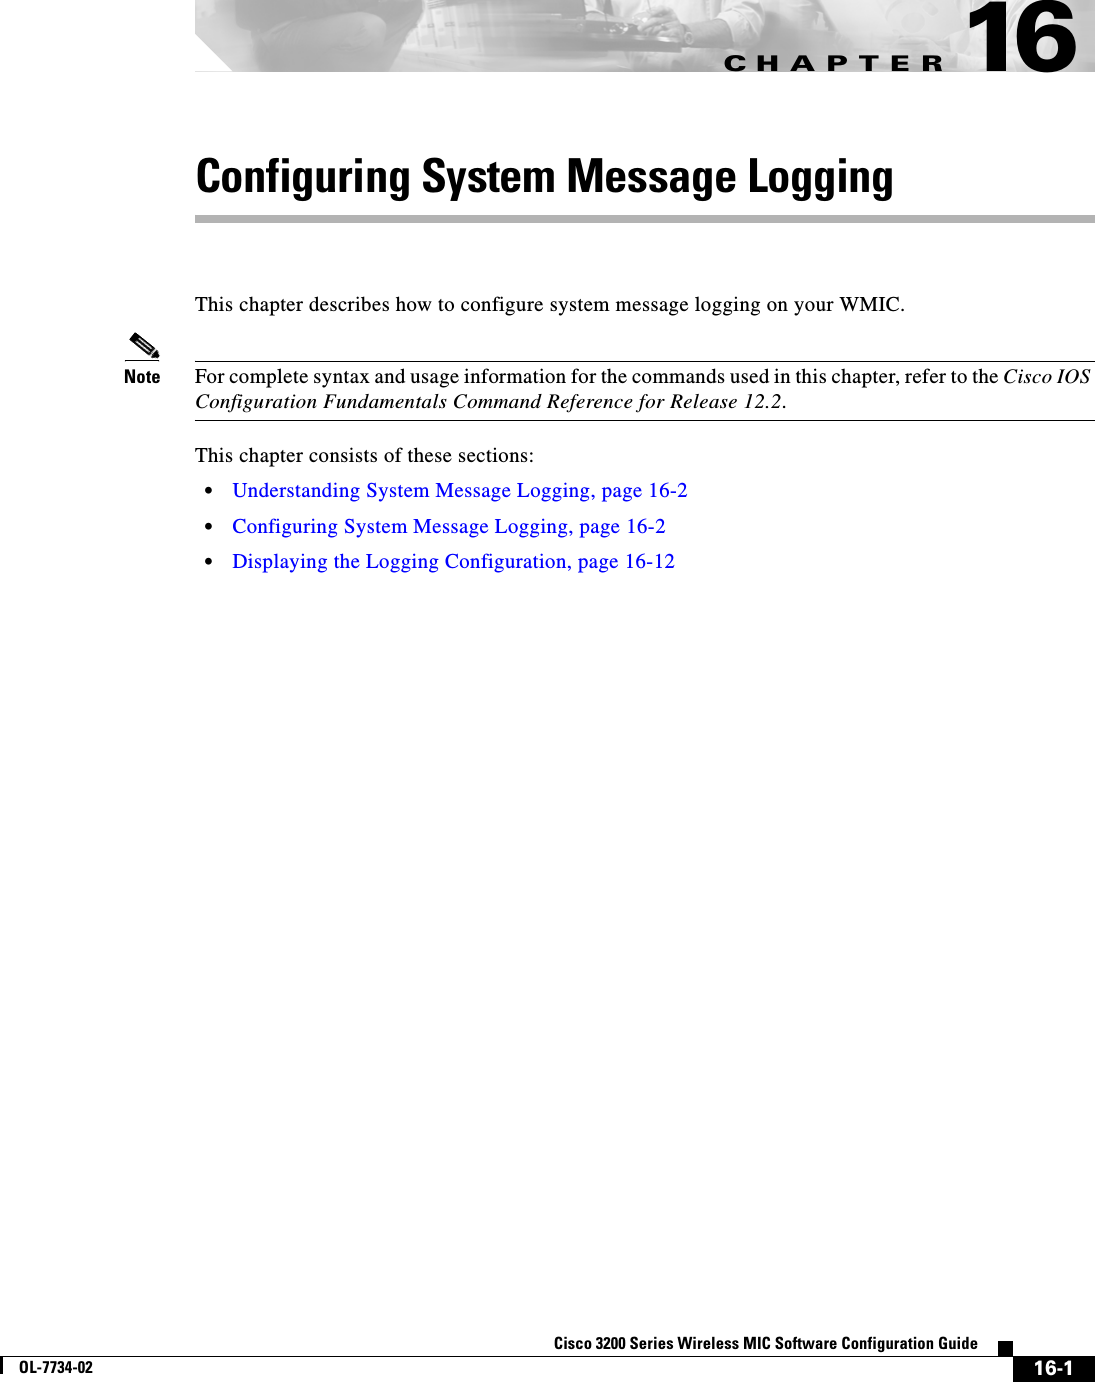 CHAPTER16-1Cisco 3200 Series Wireless MIC Software Configuration GuideOL-7734-0216Configuring System Message LoggingThis chapter describes how to configure system message logging on your WMIC.Note For complete syntax and usage information for the commands used in this chapter, refer to the Cisco IOS Configuration Fundamentals Command Reference for Release 12.2.This chapter consists of these sections:•Understanding System Message Logging, page 16-2•Configuring System Message Logging, page 16-2•Displaying the Logging Configuration, page 16-12